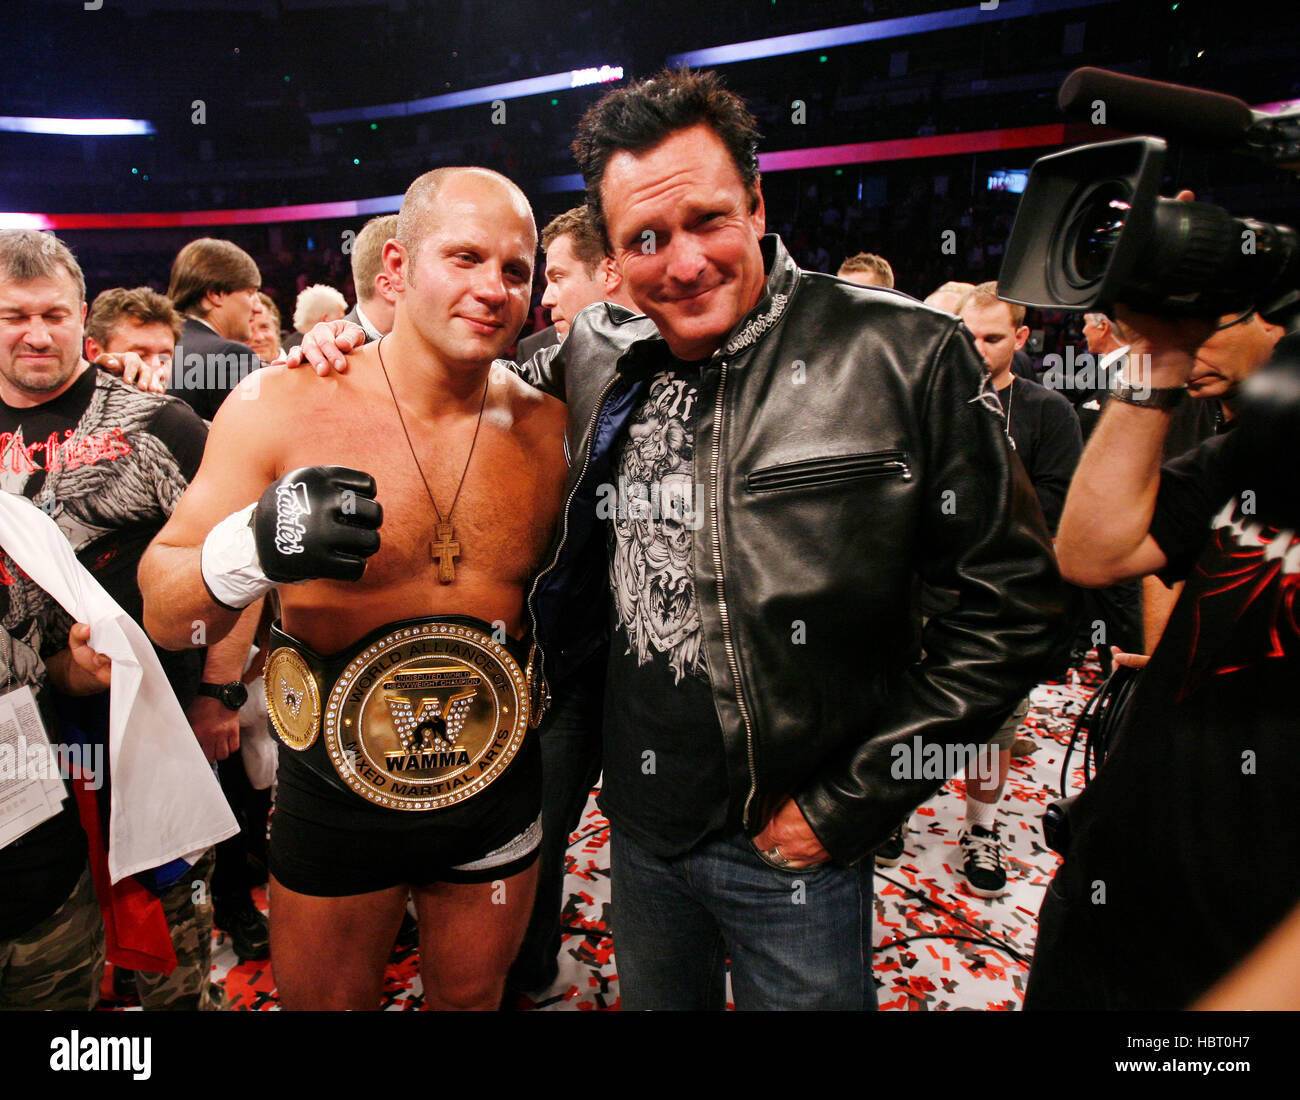 Fedor Emelianenko poses with actor Michael Madsen in the ring after defeating Tim Sylvia at Affliction's 'Banned', a mixed martial arts fight at the Honda Center on July 19, 2008 in Anaheim, California. Francis Specker Stock Photo